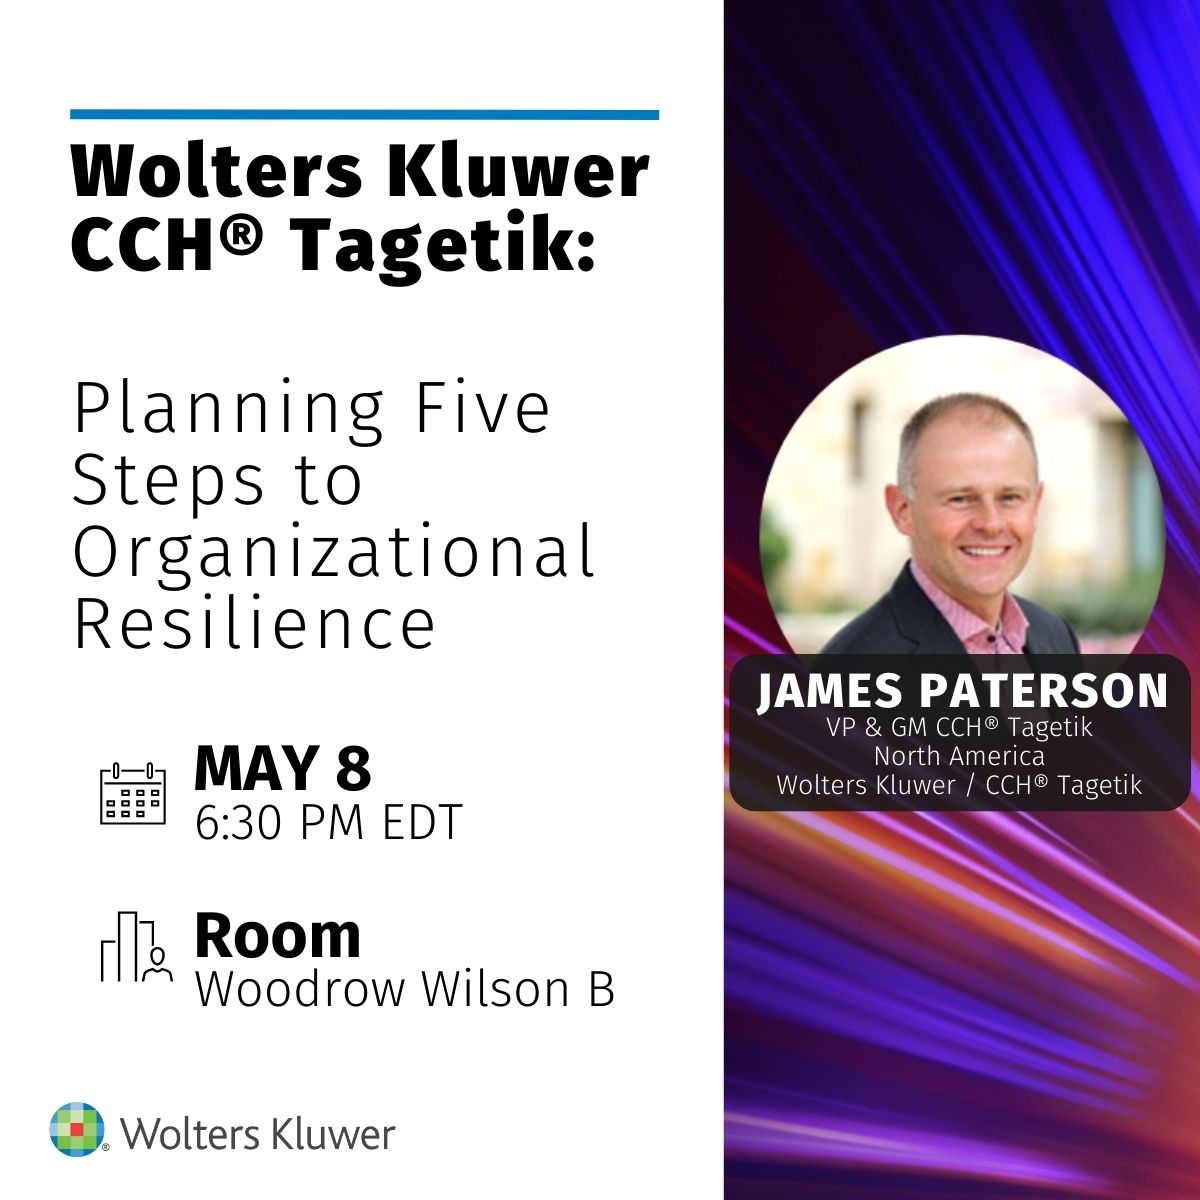 Our session 'Wolters Kluwer CCH Tagetik: Planning Five Steps to Organizational Resilience' will start in 30 minutes! Join James Patterson, CCH Tagetik NA VP and General Manager to discover the five steps to evolve your planning. #WoltersKluwer #CCHTagetik #GartnerFinance